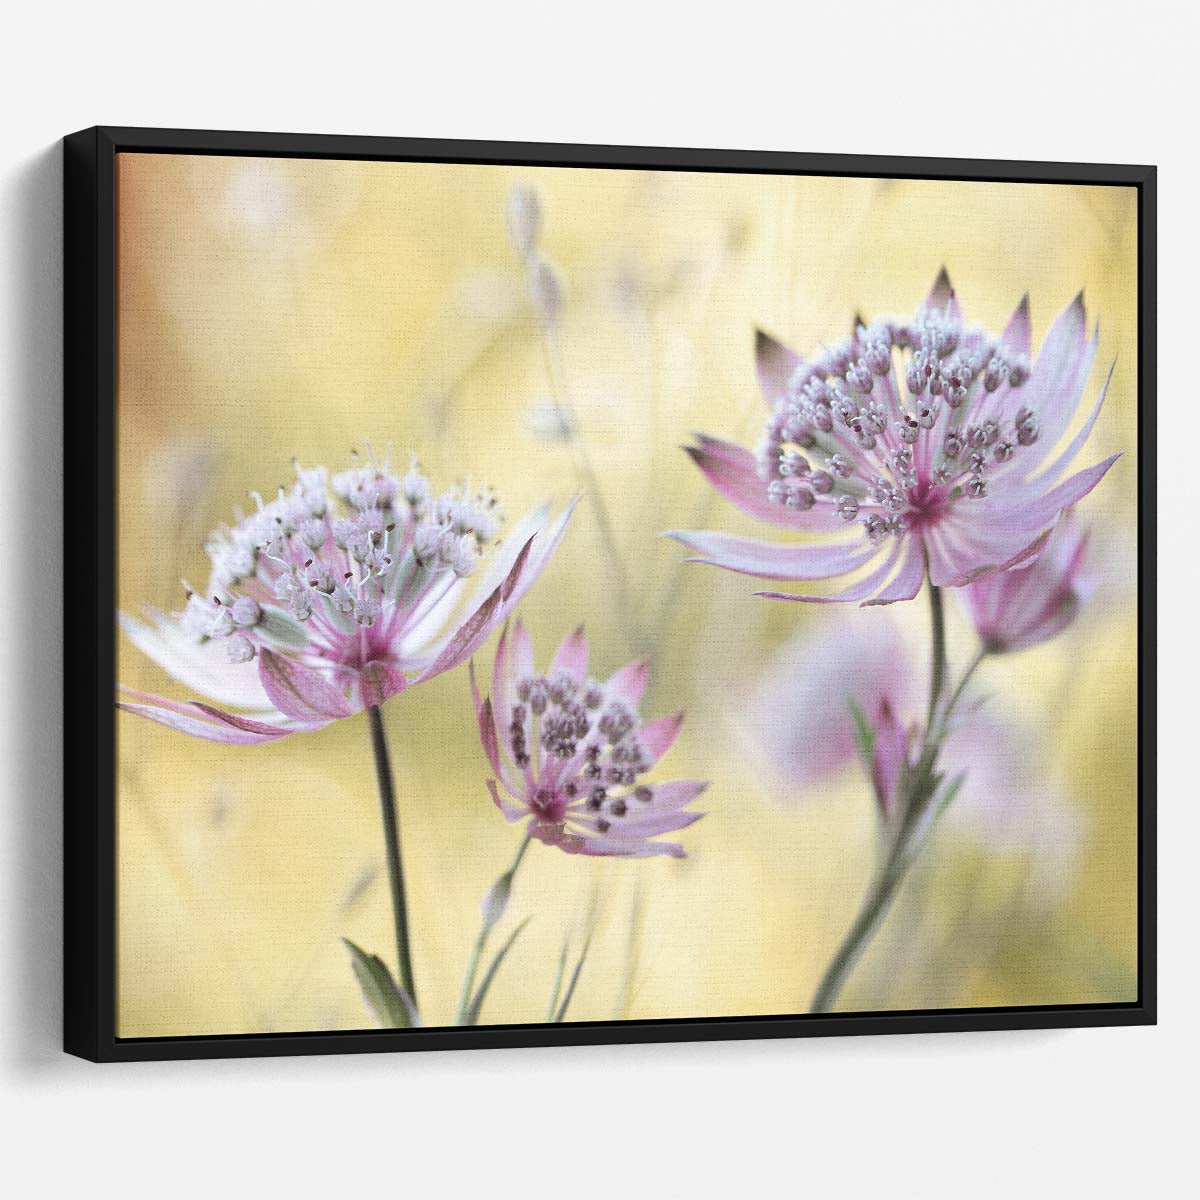 Summer Pink Astrantia Major Floral Macro Wall Art by Luxuriance Designs. Made in USA.